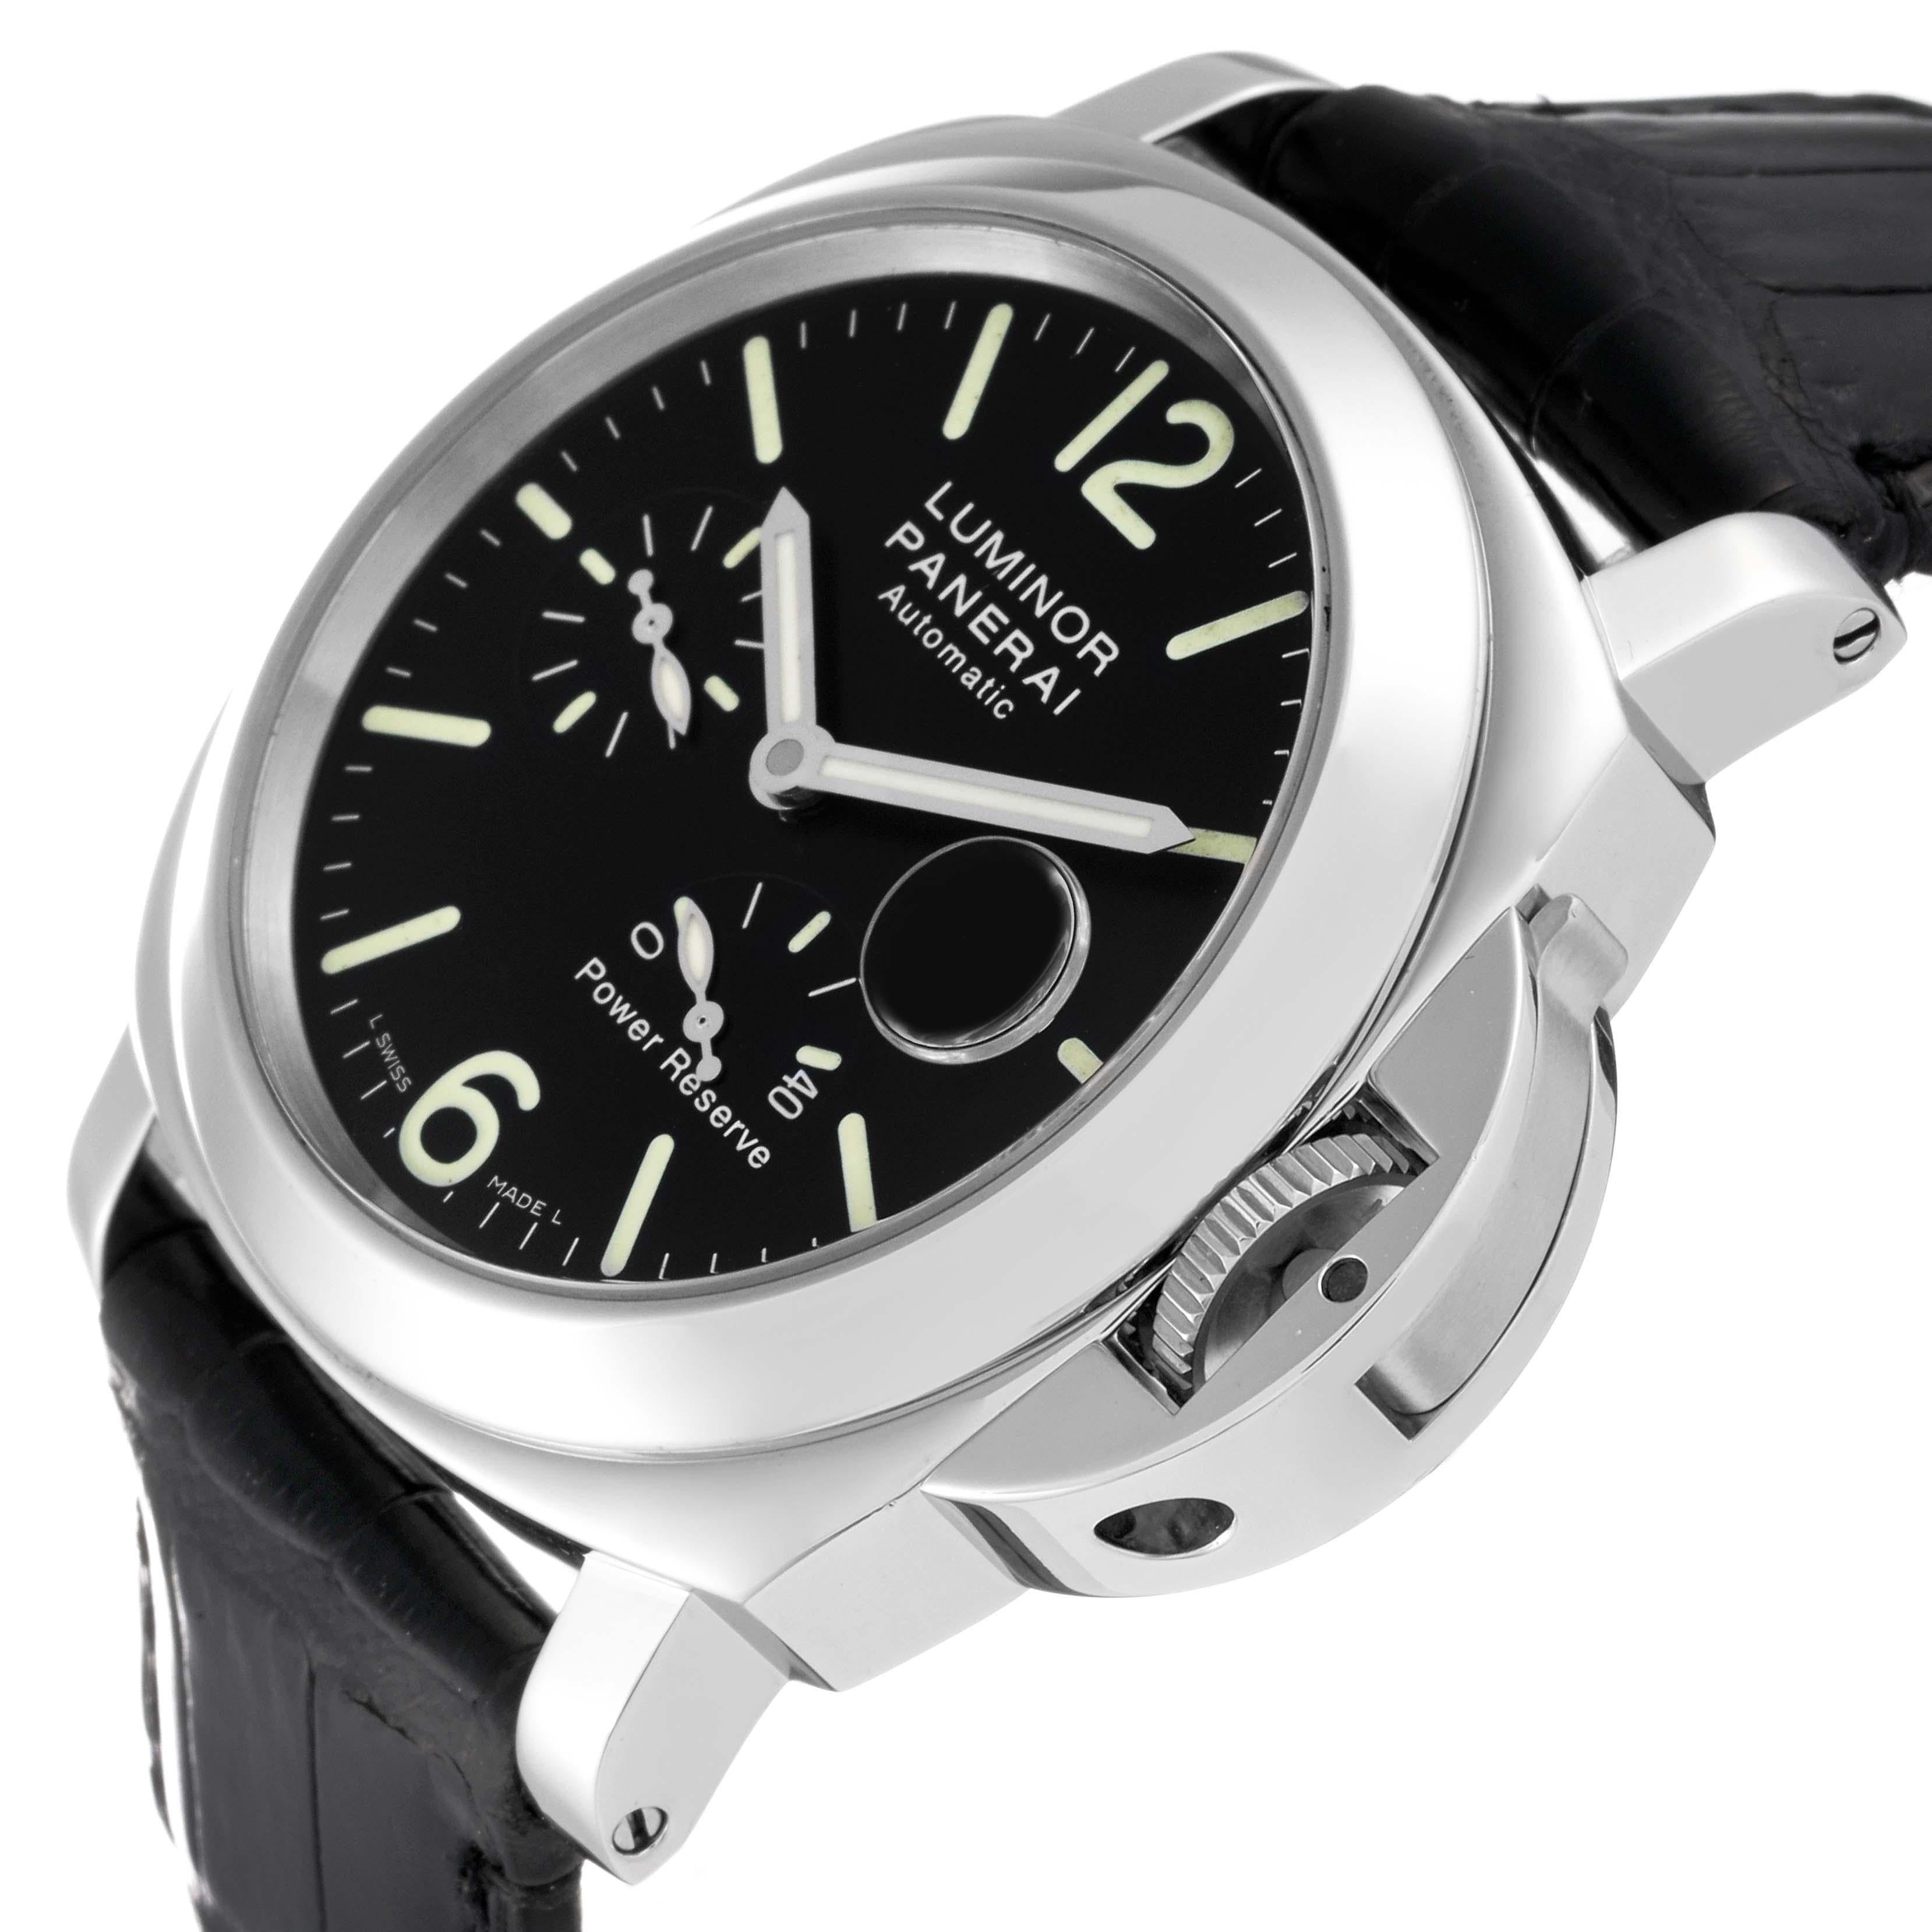 Panerai Luminor Power Reserve Automatic Steel Mens Watch PAM00090. Automatic self-winding movement. Stainless steel cushion case 44.0 mm in diameter. Panerai patented crown protector. Polished stainless steel sloped bezel. Scratch resistant sapphire